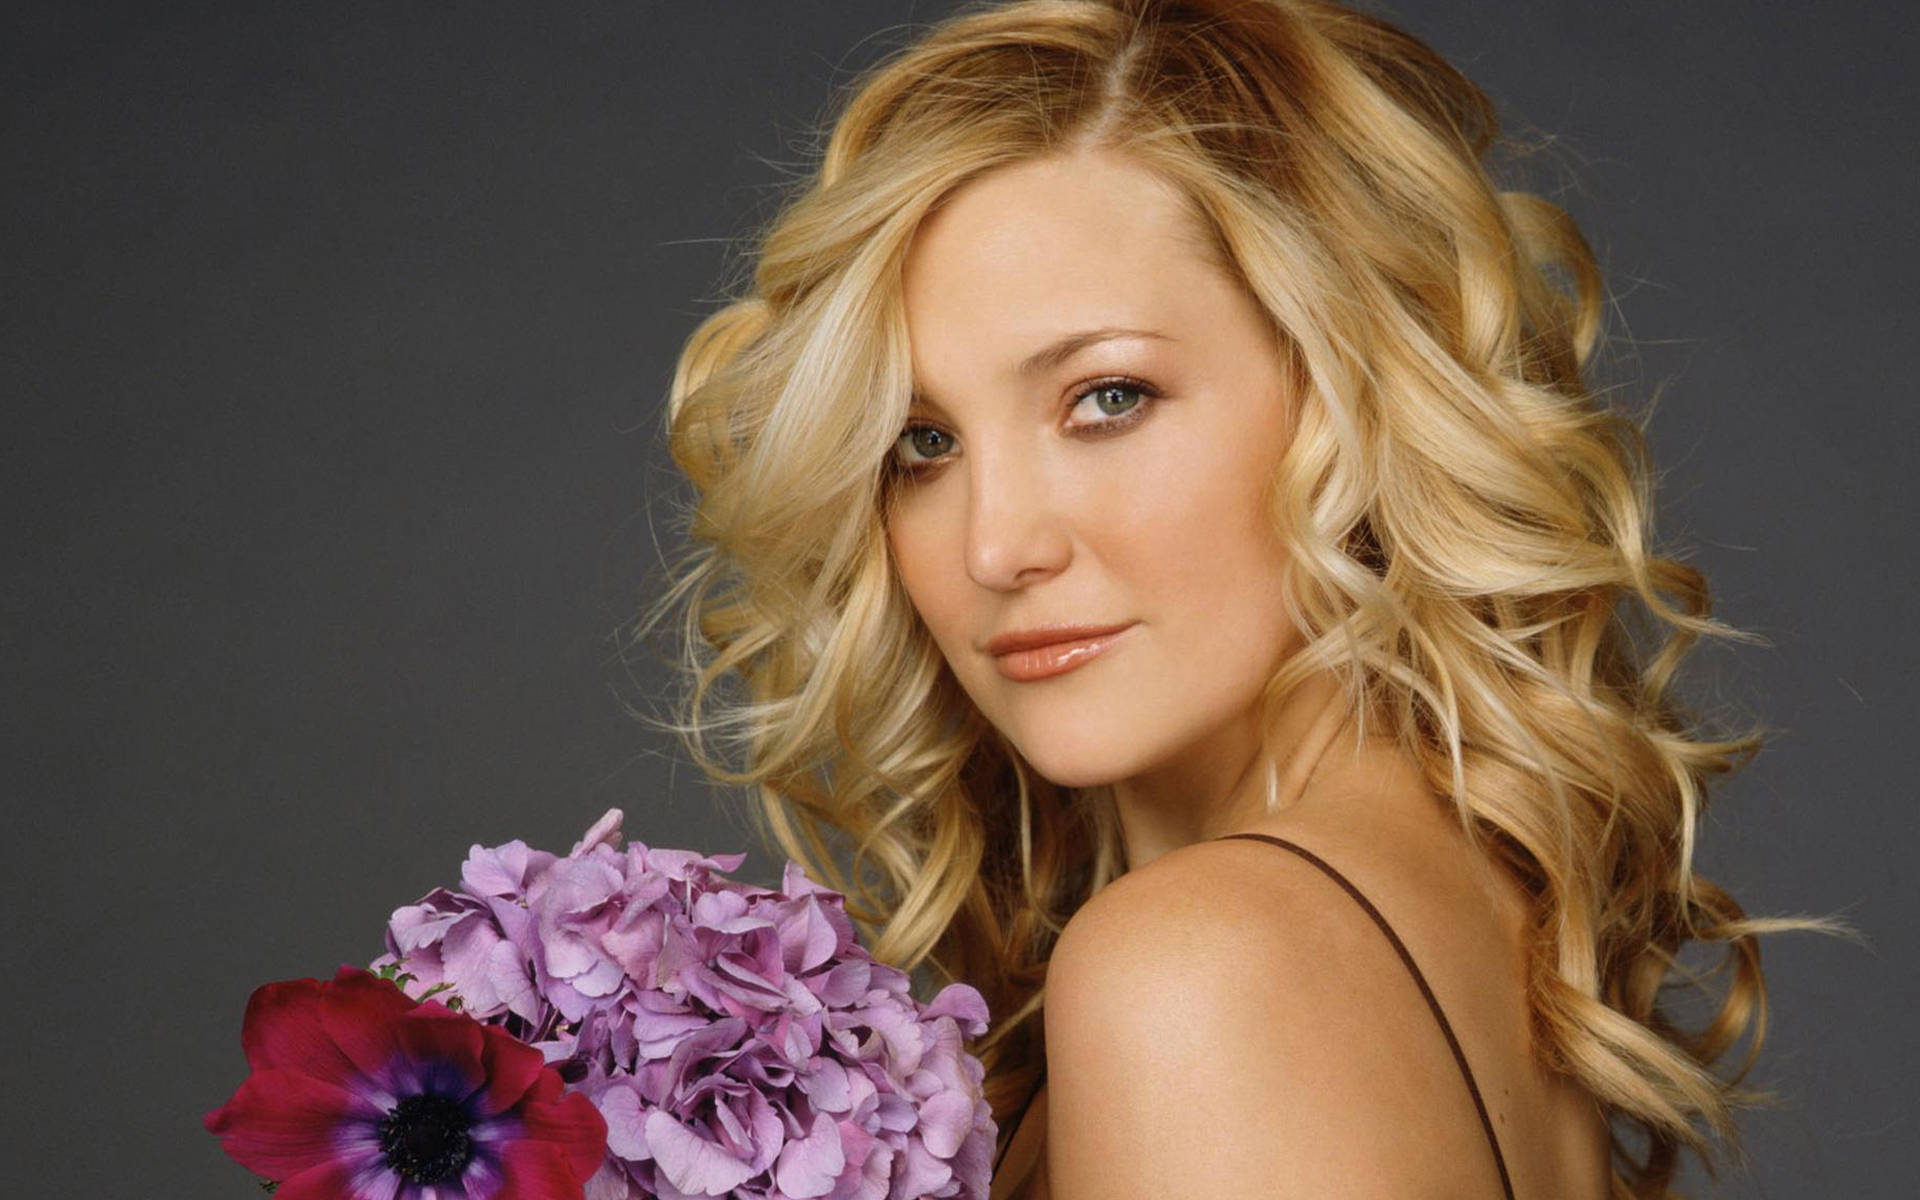 Kate Hudson With Pansy Flowers Background